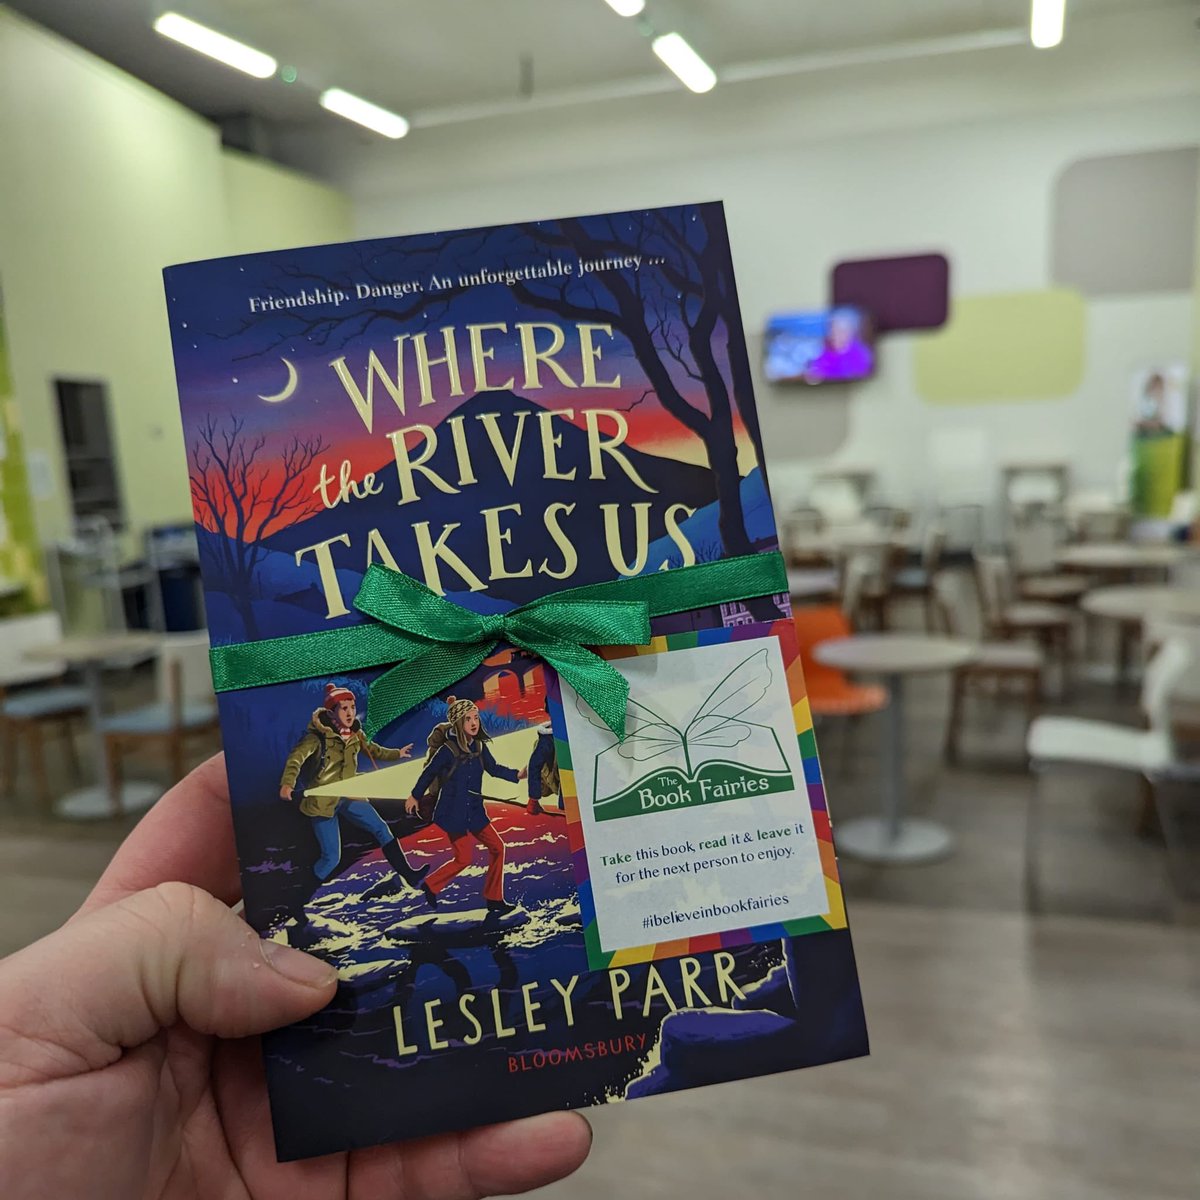 The Book Fairies are celebrating the release of Where The River Takes Us by Lesley Parr! #ibelieveinbookfairies #WhereTheRiverTakesUs #TBFTheRiver #TBFBloomsbury #MiddleGradeReads #MGReads #LesleyParr #ChildrensBooks #KidsBooks #BookBirthday #KidLit #Falkirk #BookFairiesFalkirk